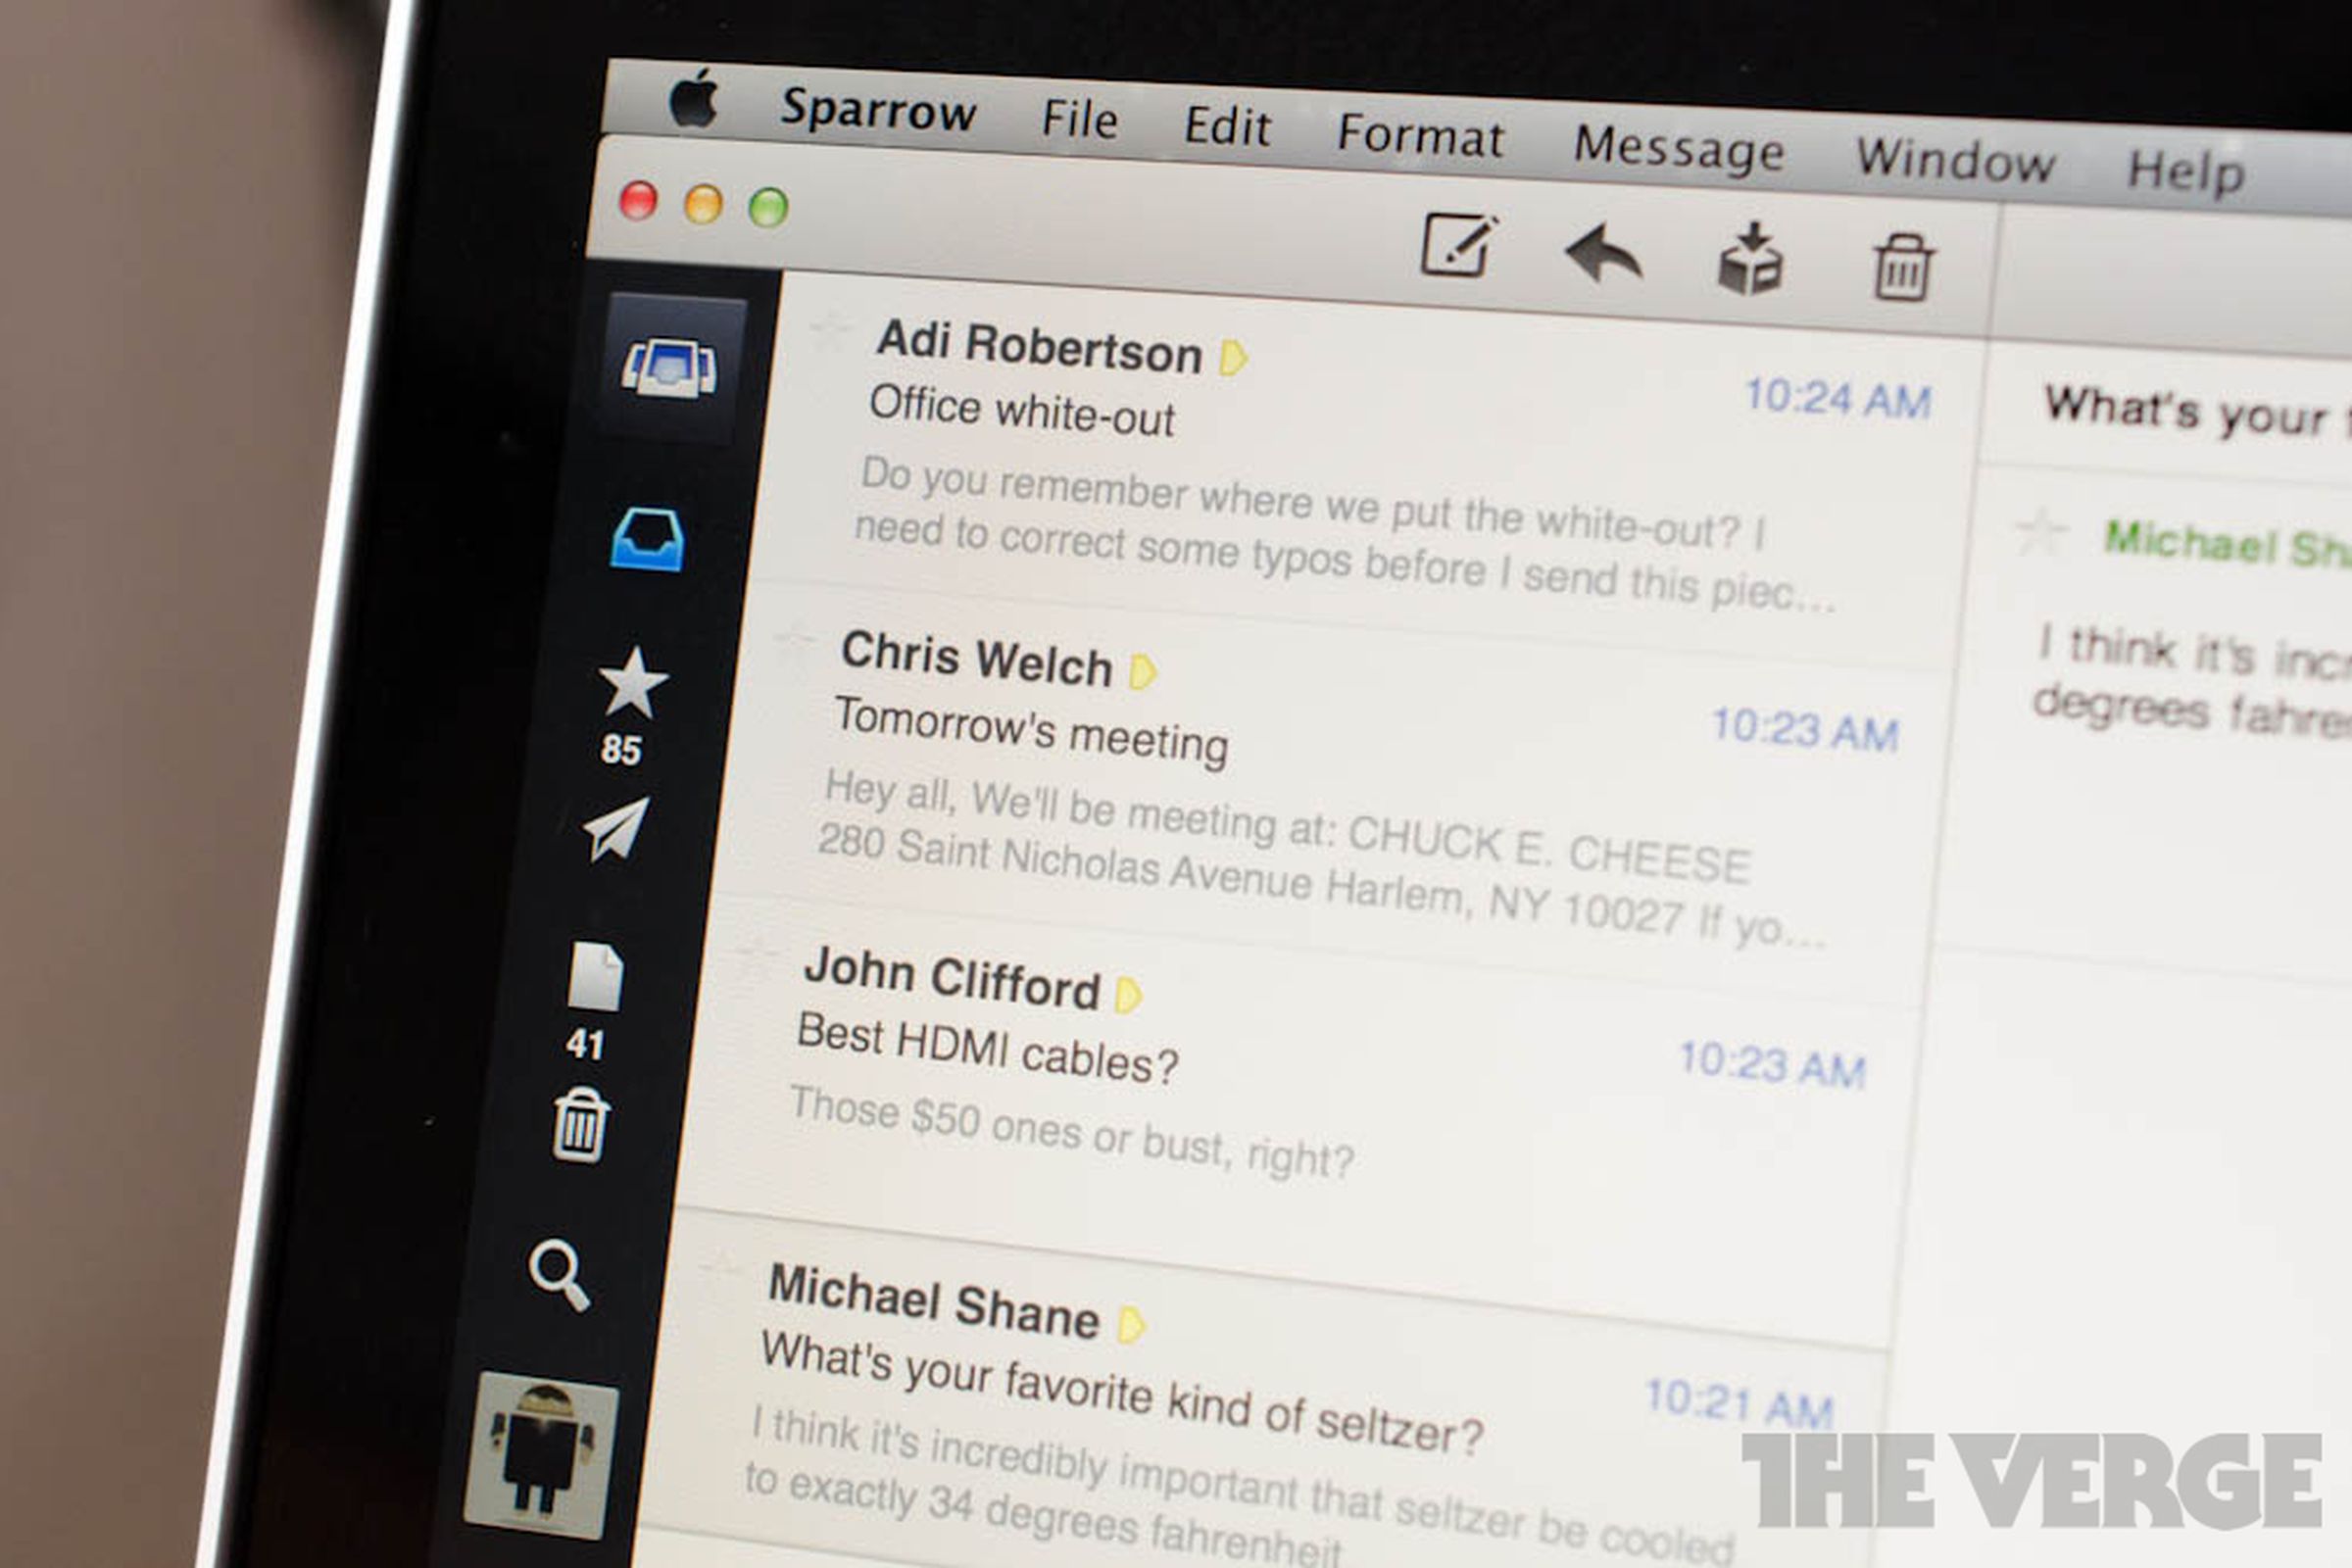 Sparrow Mac Unified inbox email stock